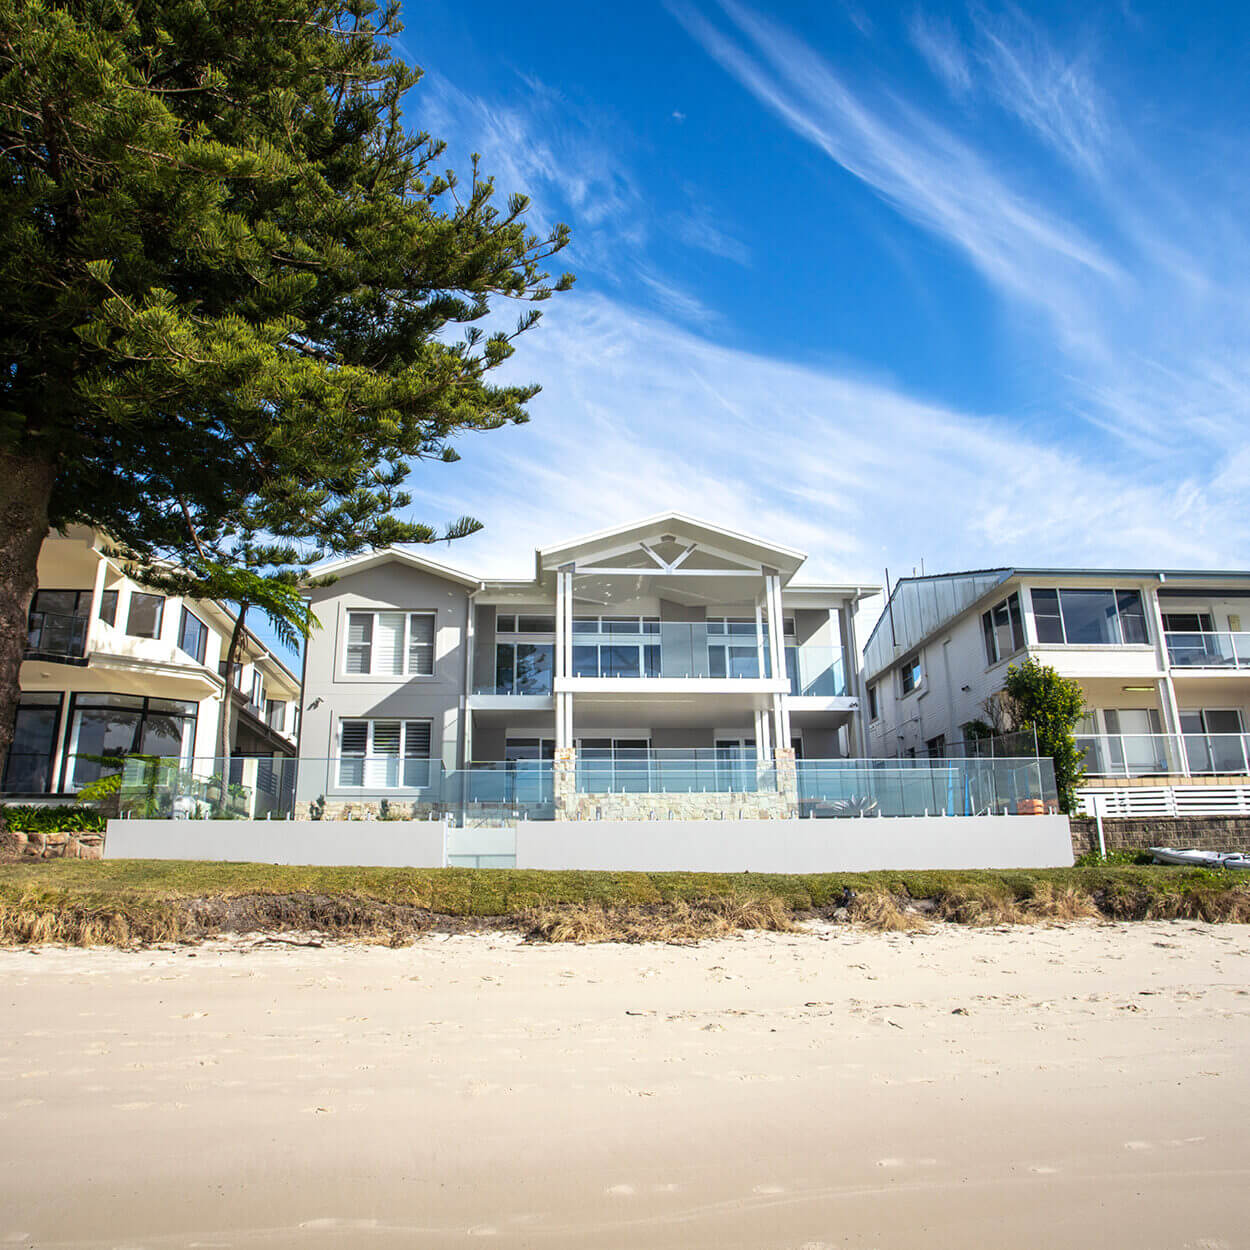 A luxurious beachfront house in Nelson Bay with large glass windows and a spacious balcony, flanked by other homes and a tall pine tree, under a clear blue sky streaked with wispy clouds.